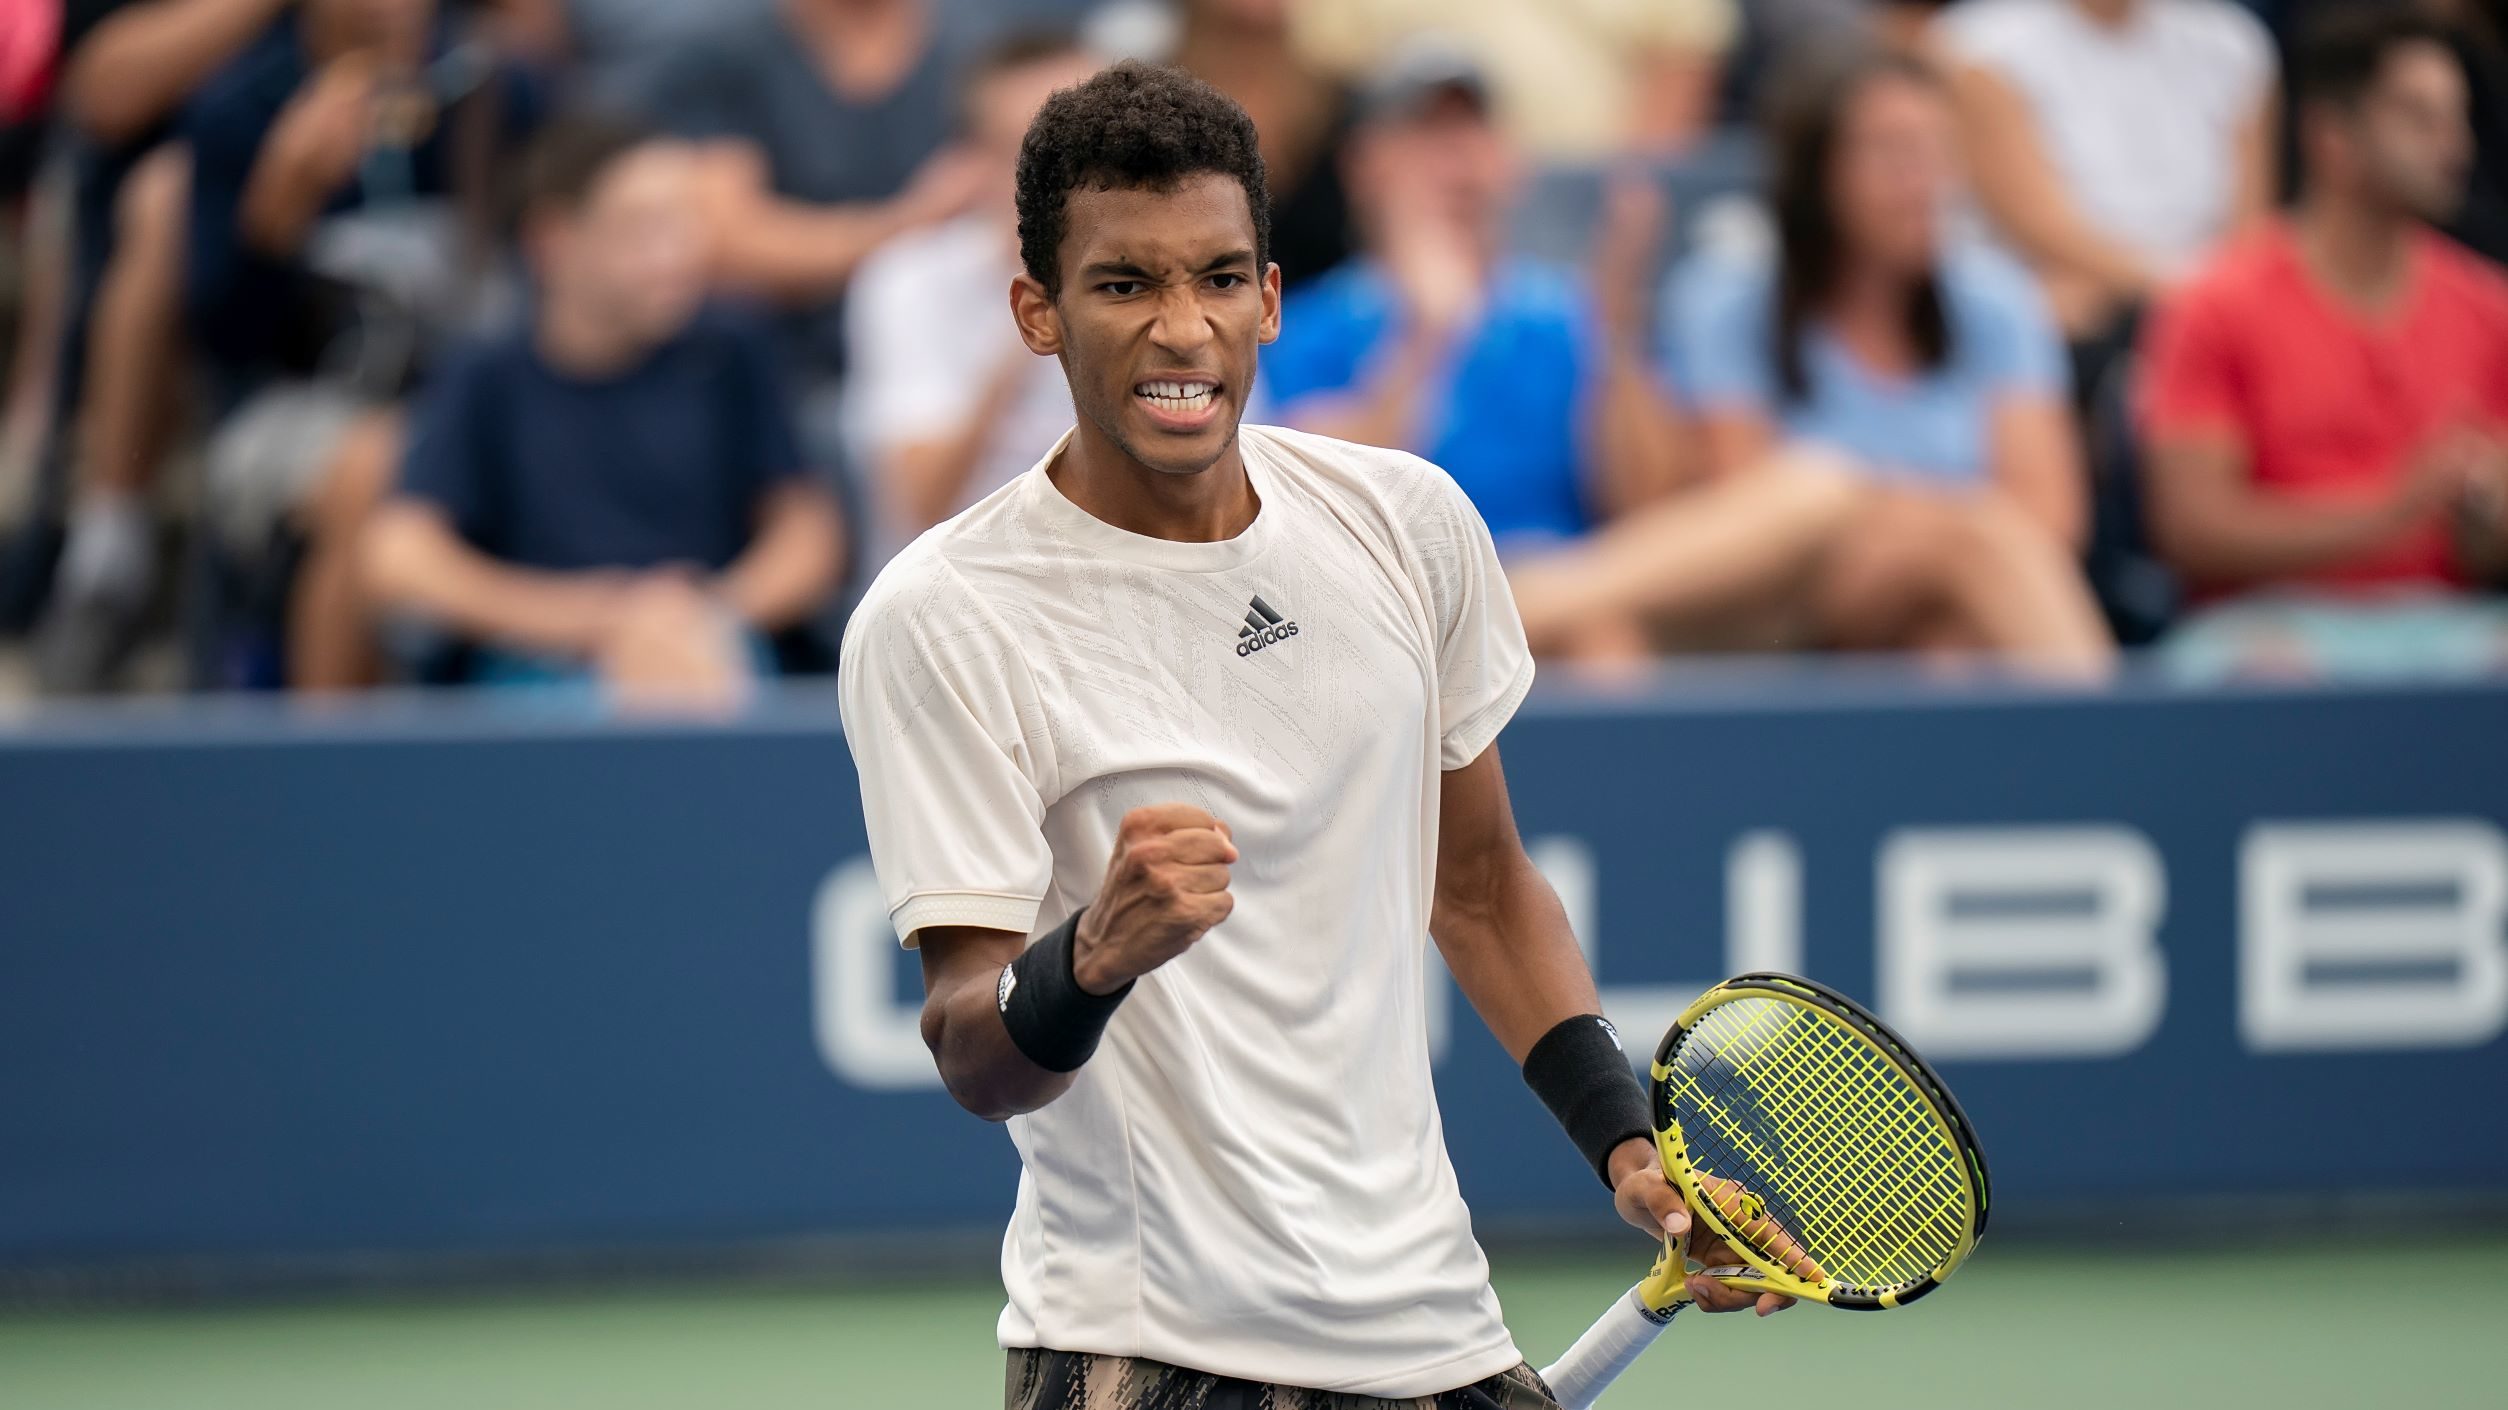 Félix Auger-Aliassime saves three match points, advances to quarter-finals in Vienna